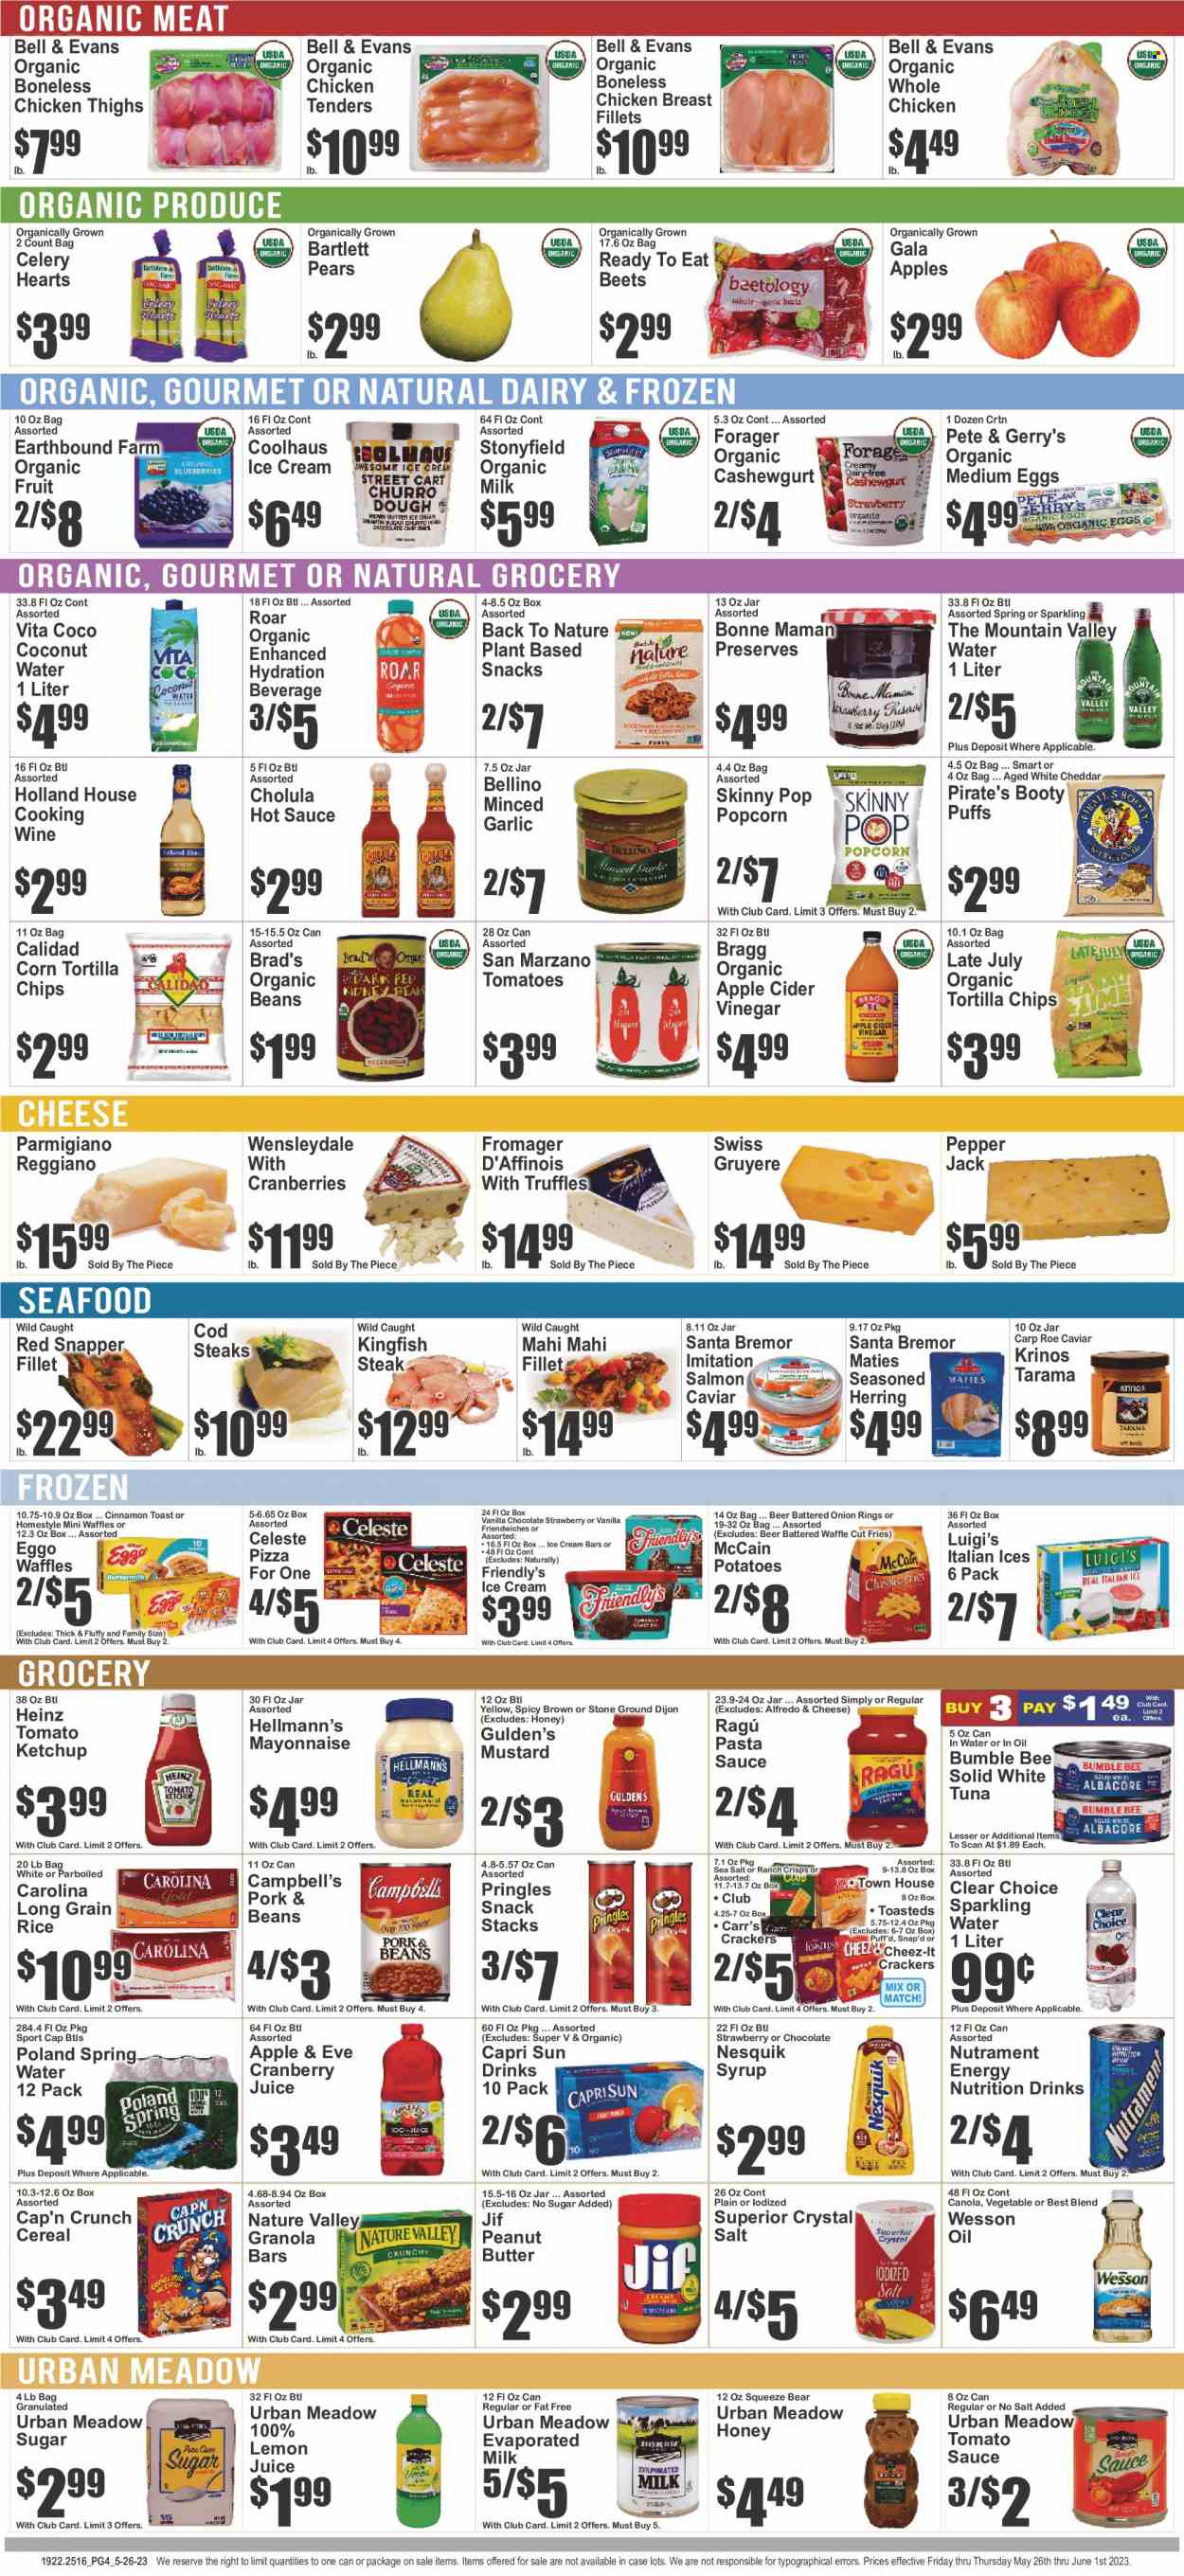 thumbnail - Brooklyn Fare Flyer - 05/26/2023 - 06/01/2023 - Sales products - puffs, waffles, beans, celery, potatoes, sleeved celery, Bartlett pears, Gala, pears, carp, cod, mahi mahi, red snapper, tuna, herring, seafood, king fish, Campbell's, pizza, pasta sauce, onion rings, chicken tenders, Bumble Bee, sauce, ragú pasta, ready meal, snack, Gruyere, Wensleydale, Pepper Jack cheese, Parmigiano Reggiano, Nesquik, evaporated milk, organic milk, eggs, mayonnaise, Hellmann’s, ice cream, ice cream bars, Friendly's Ice Cream, McCain, potato fries, Celeste, truffles, crackers, Santa, tortilla chips, Pringles, popcorn, Cheez-It, Skinny Pop, salty snack, cranberries, tomato sauce, Heinz, cereals, granola bar, Cap'n Crunch, Nature Valley, rice, long grain rice, cinnamon, mustard, hot sauce, ketchup, ragu, apple cider vinegar, honey, peanut butter, syrup, Jif, Capri Sun, cranberry juice, coconut water, spring water, sparkling water, water, lemon juice, cooking wine, red wine, wine, alcohol, whole chicken, chicken breasts, chicken thighs, steak. Page 4.